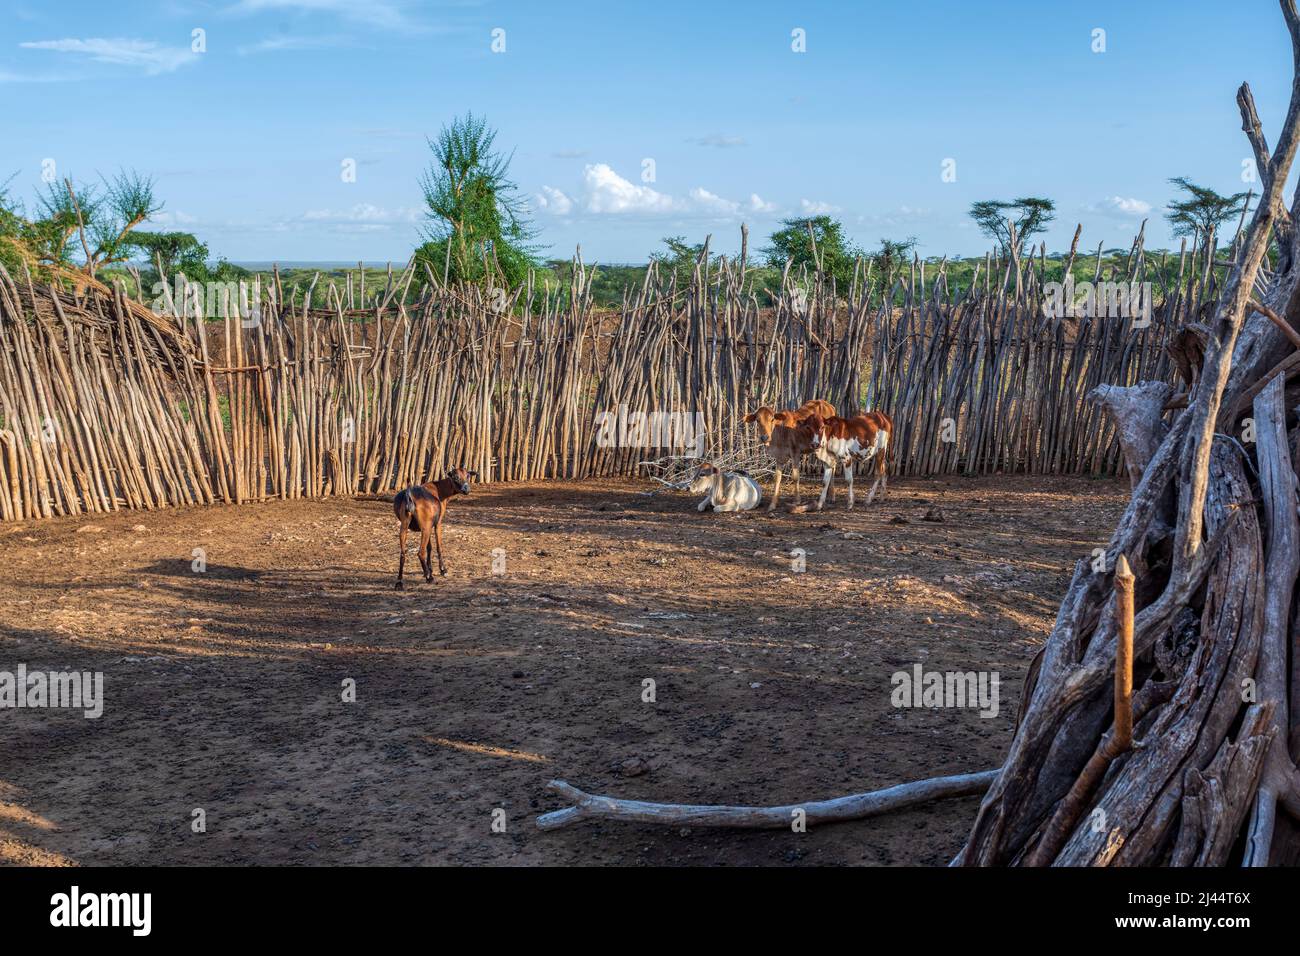 Traditional cattle pen in Hamar Village. The Hamars are the original tribe in southwestern Ethiopia, Africa. They are largely pastoralists, so their c Stock Photo